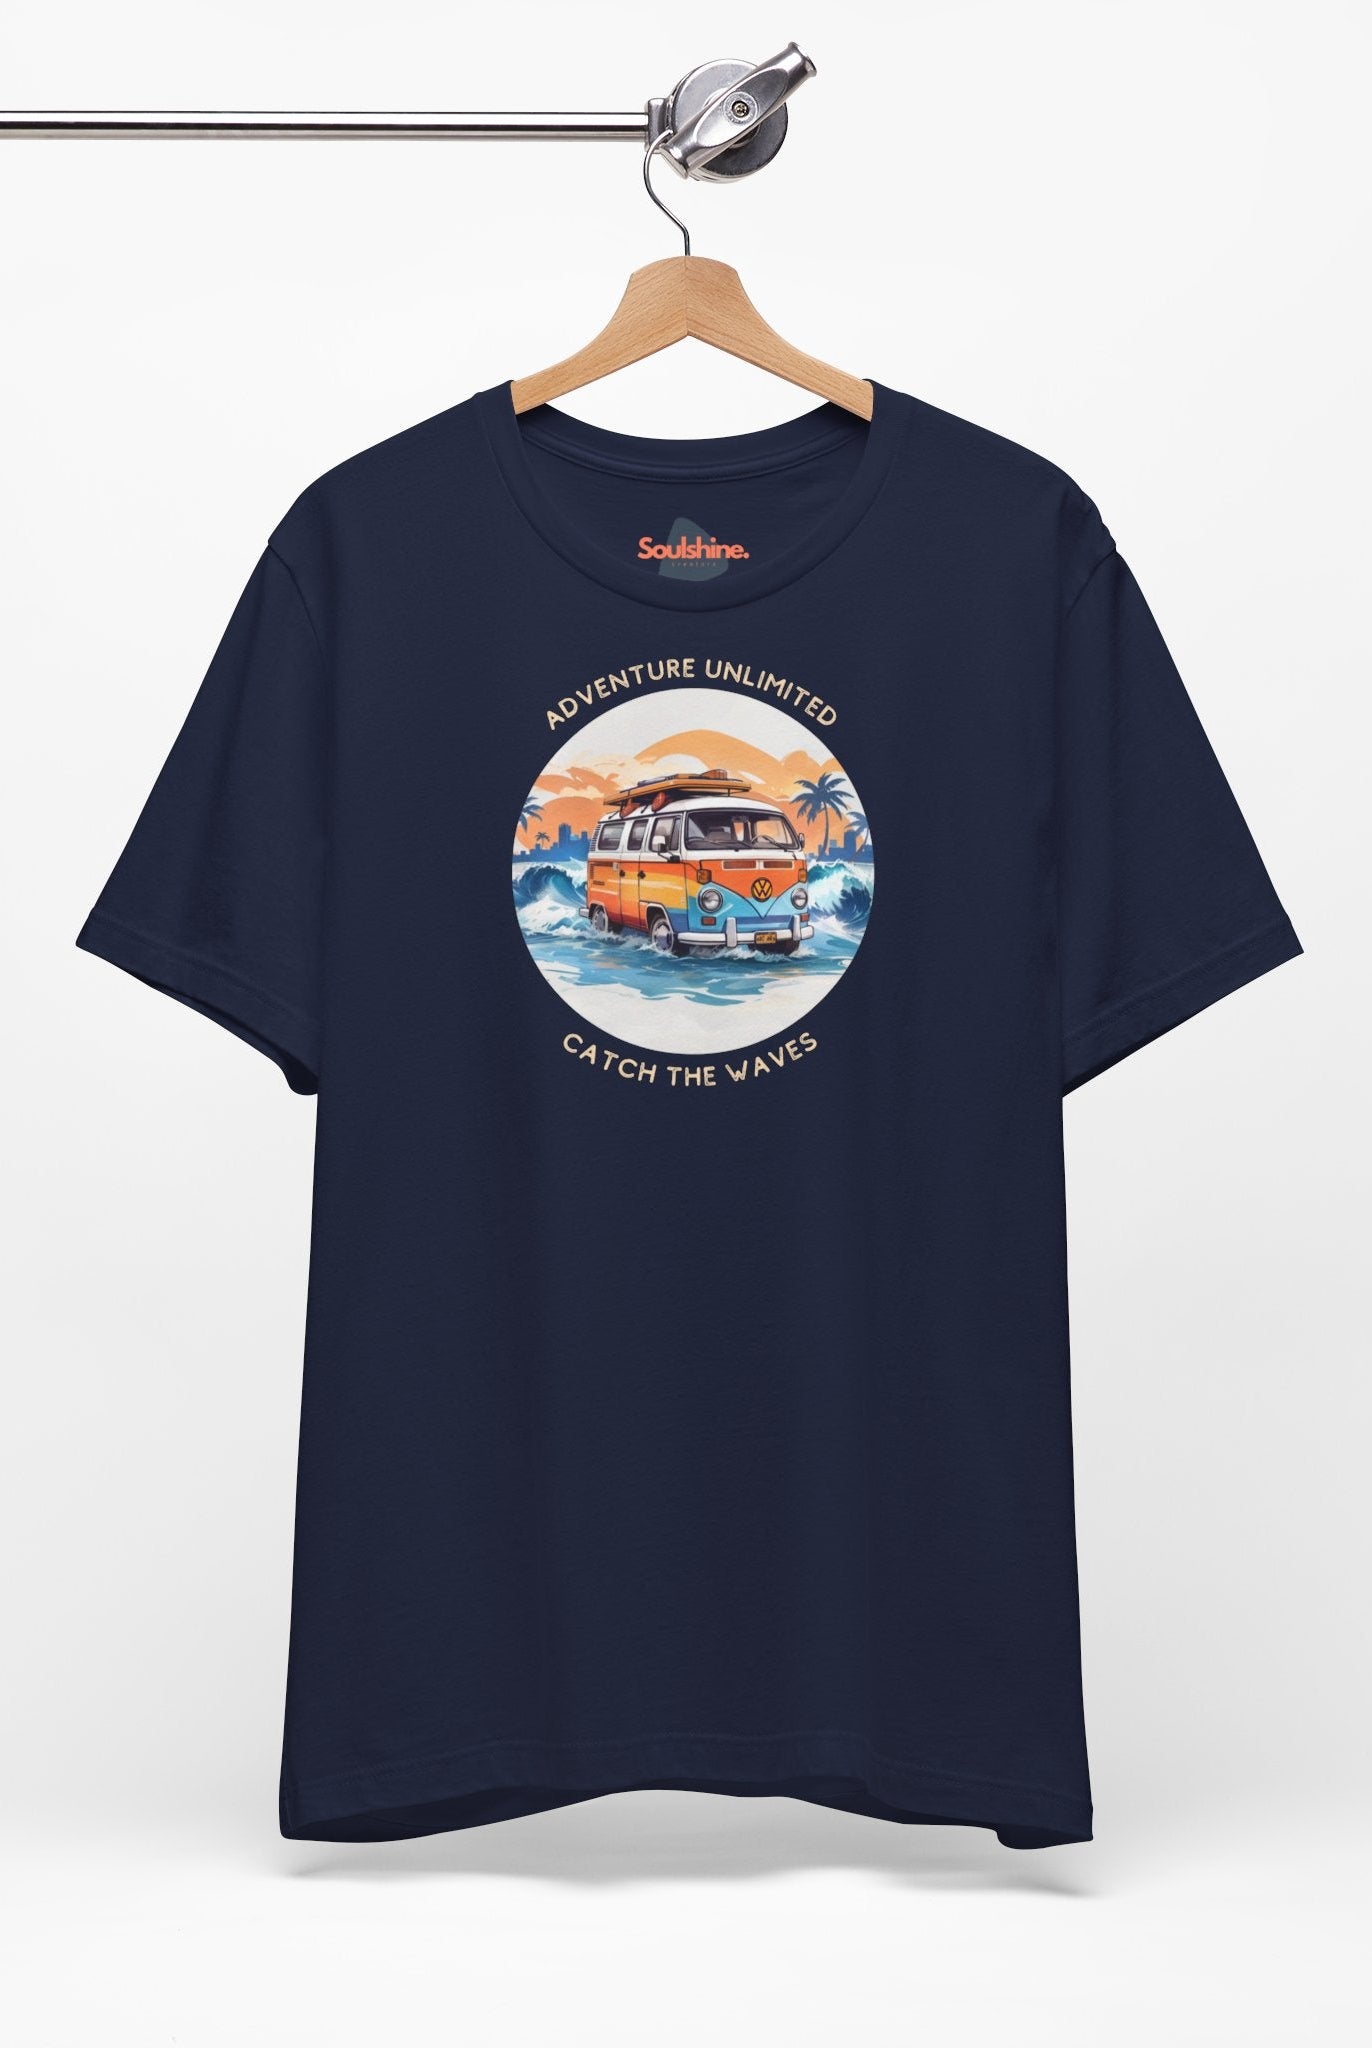 Adventure Unlimited navy t-shirt with ’Soulshinecreators’ printed on it